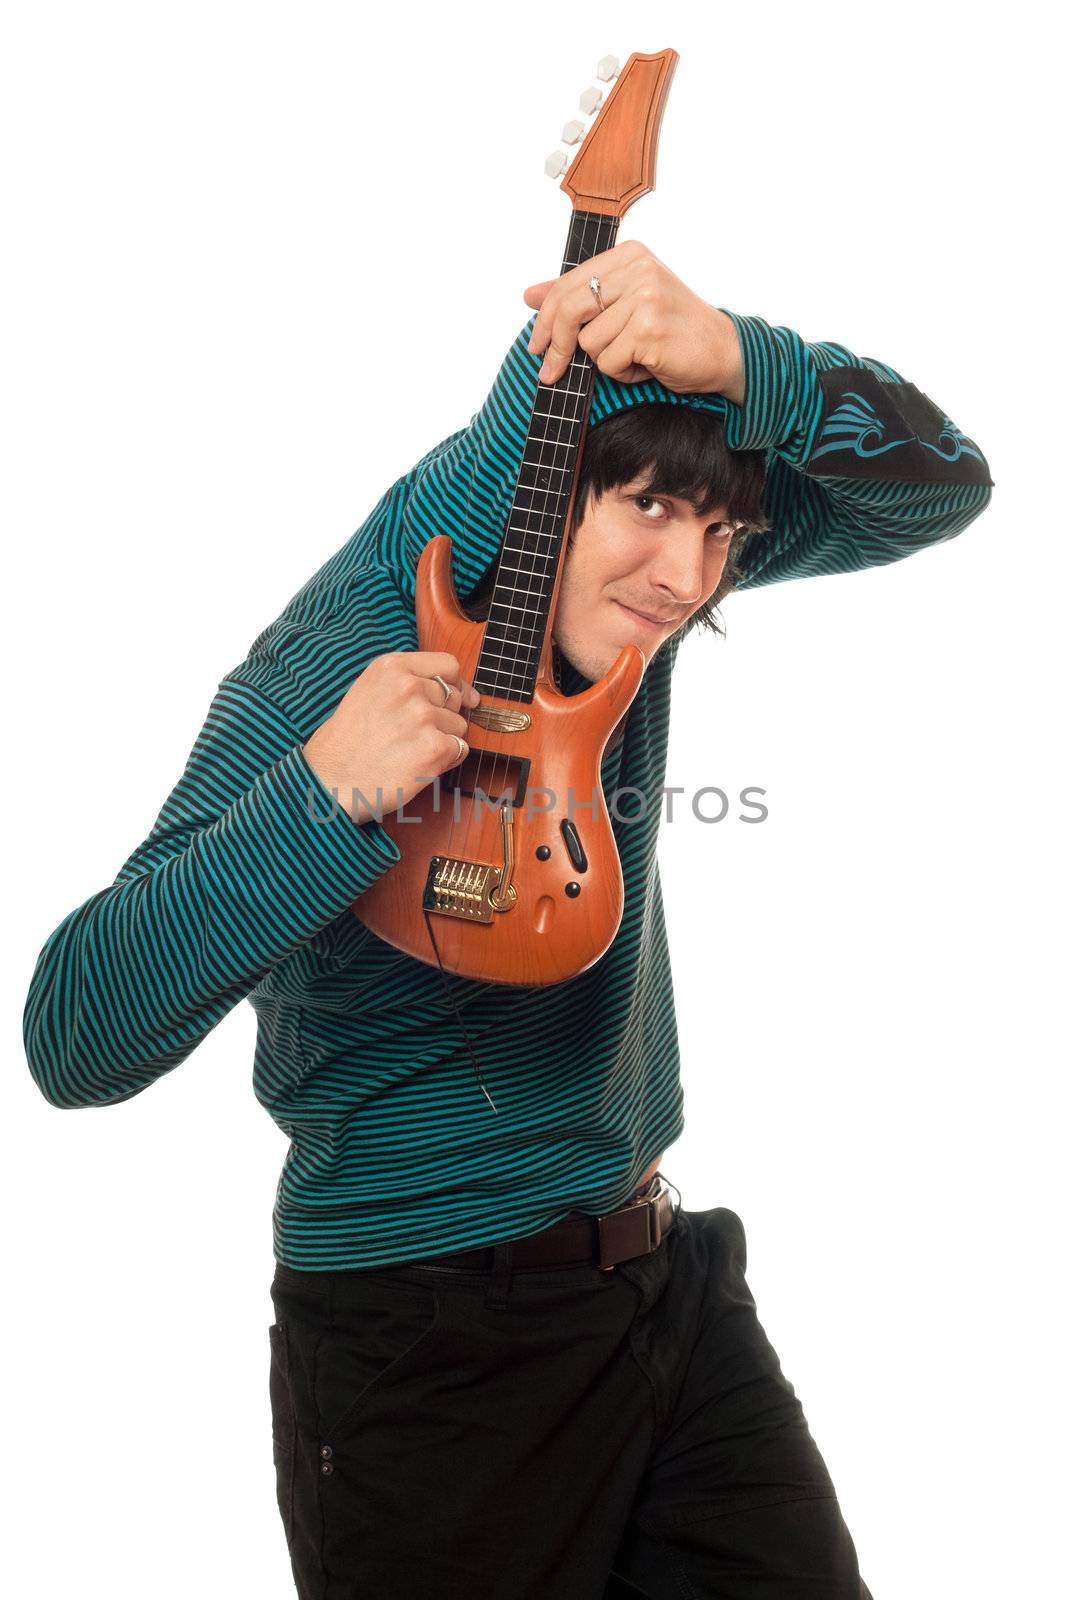 Eccentric young man with a little guitar